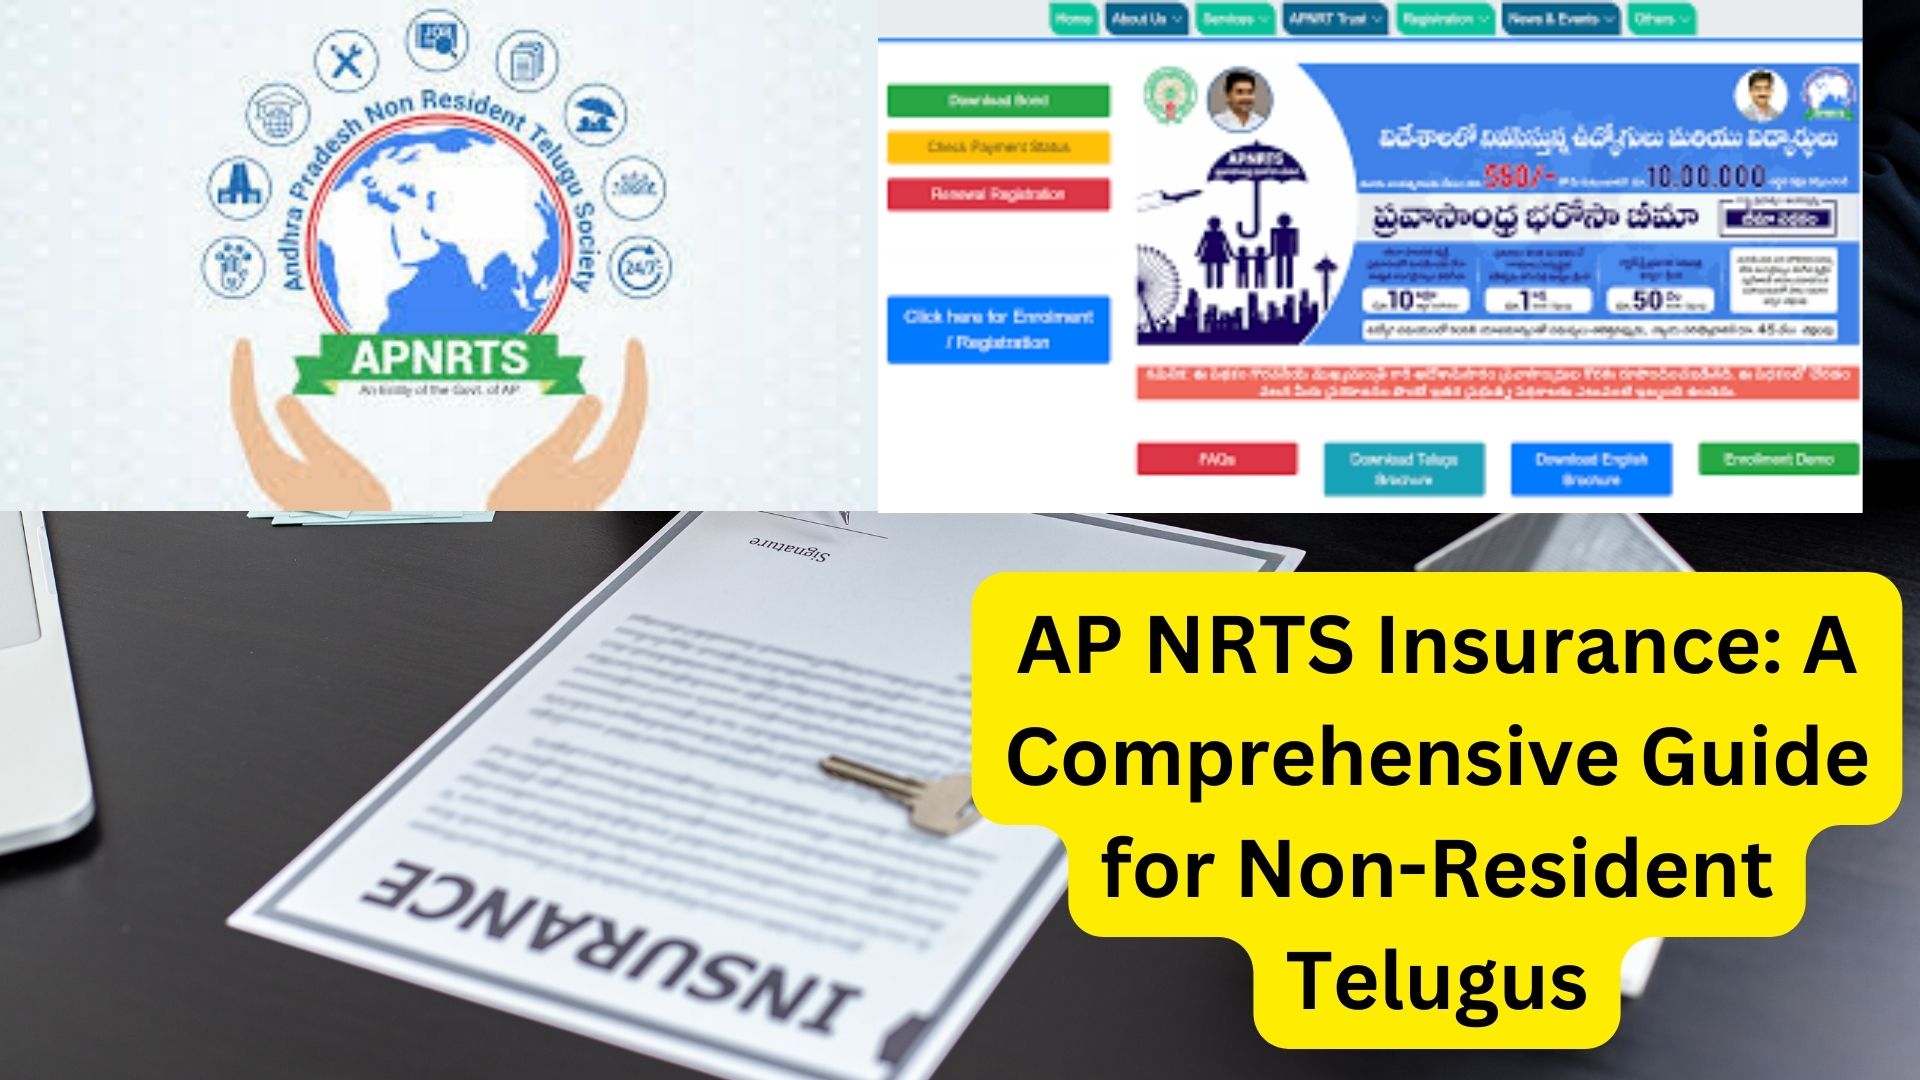 AP NRTS Insurance: A Comprehensive Guide for Non-Resident Telugus